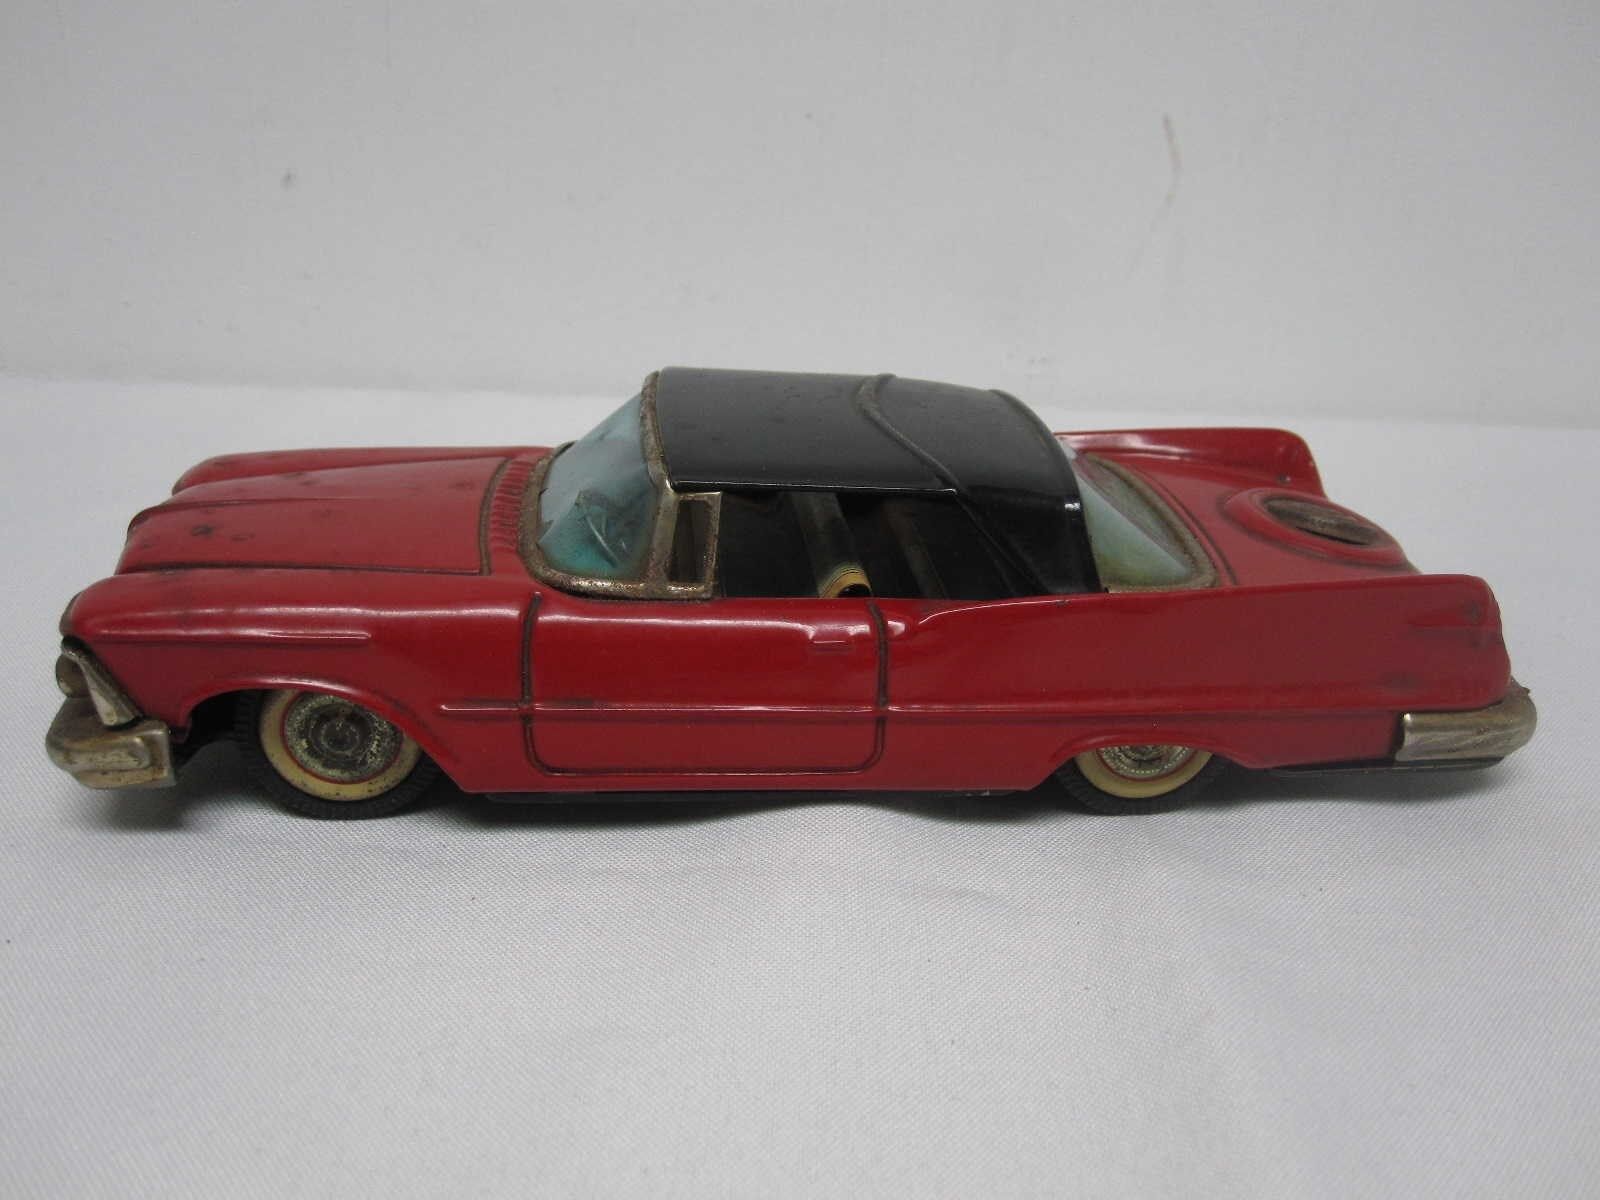 VINTAGE BANDAI JAPAN RED BLACK TO Detroit Mall IMPERIAL FRICTION 67% OFF of fixed price TIN CHRYSLER